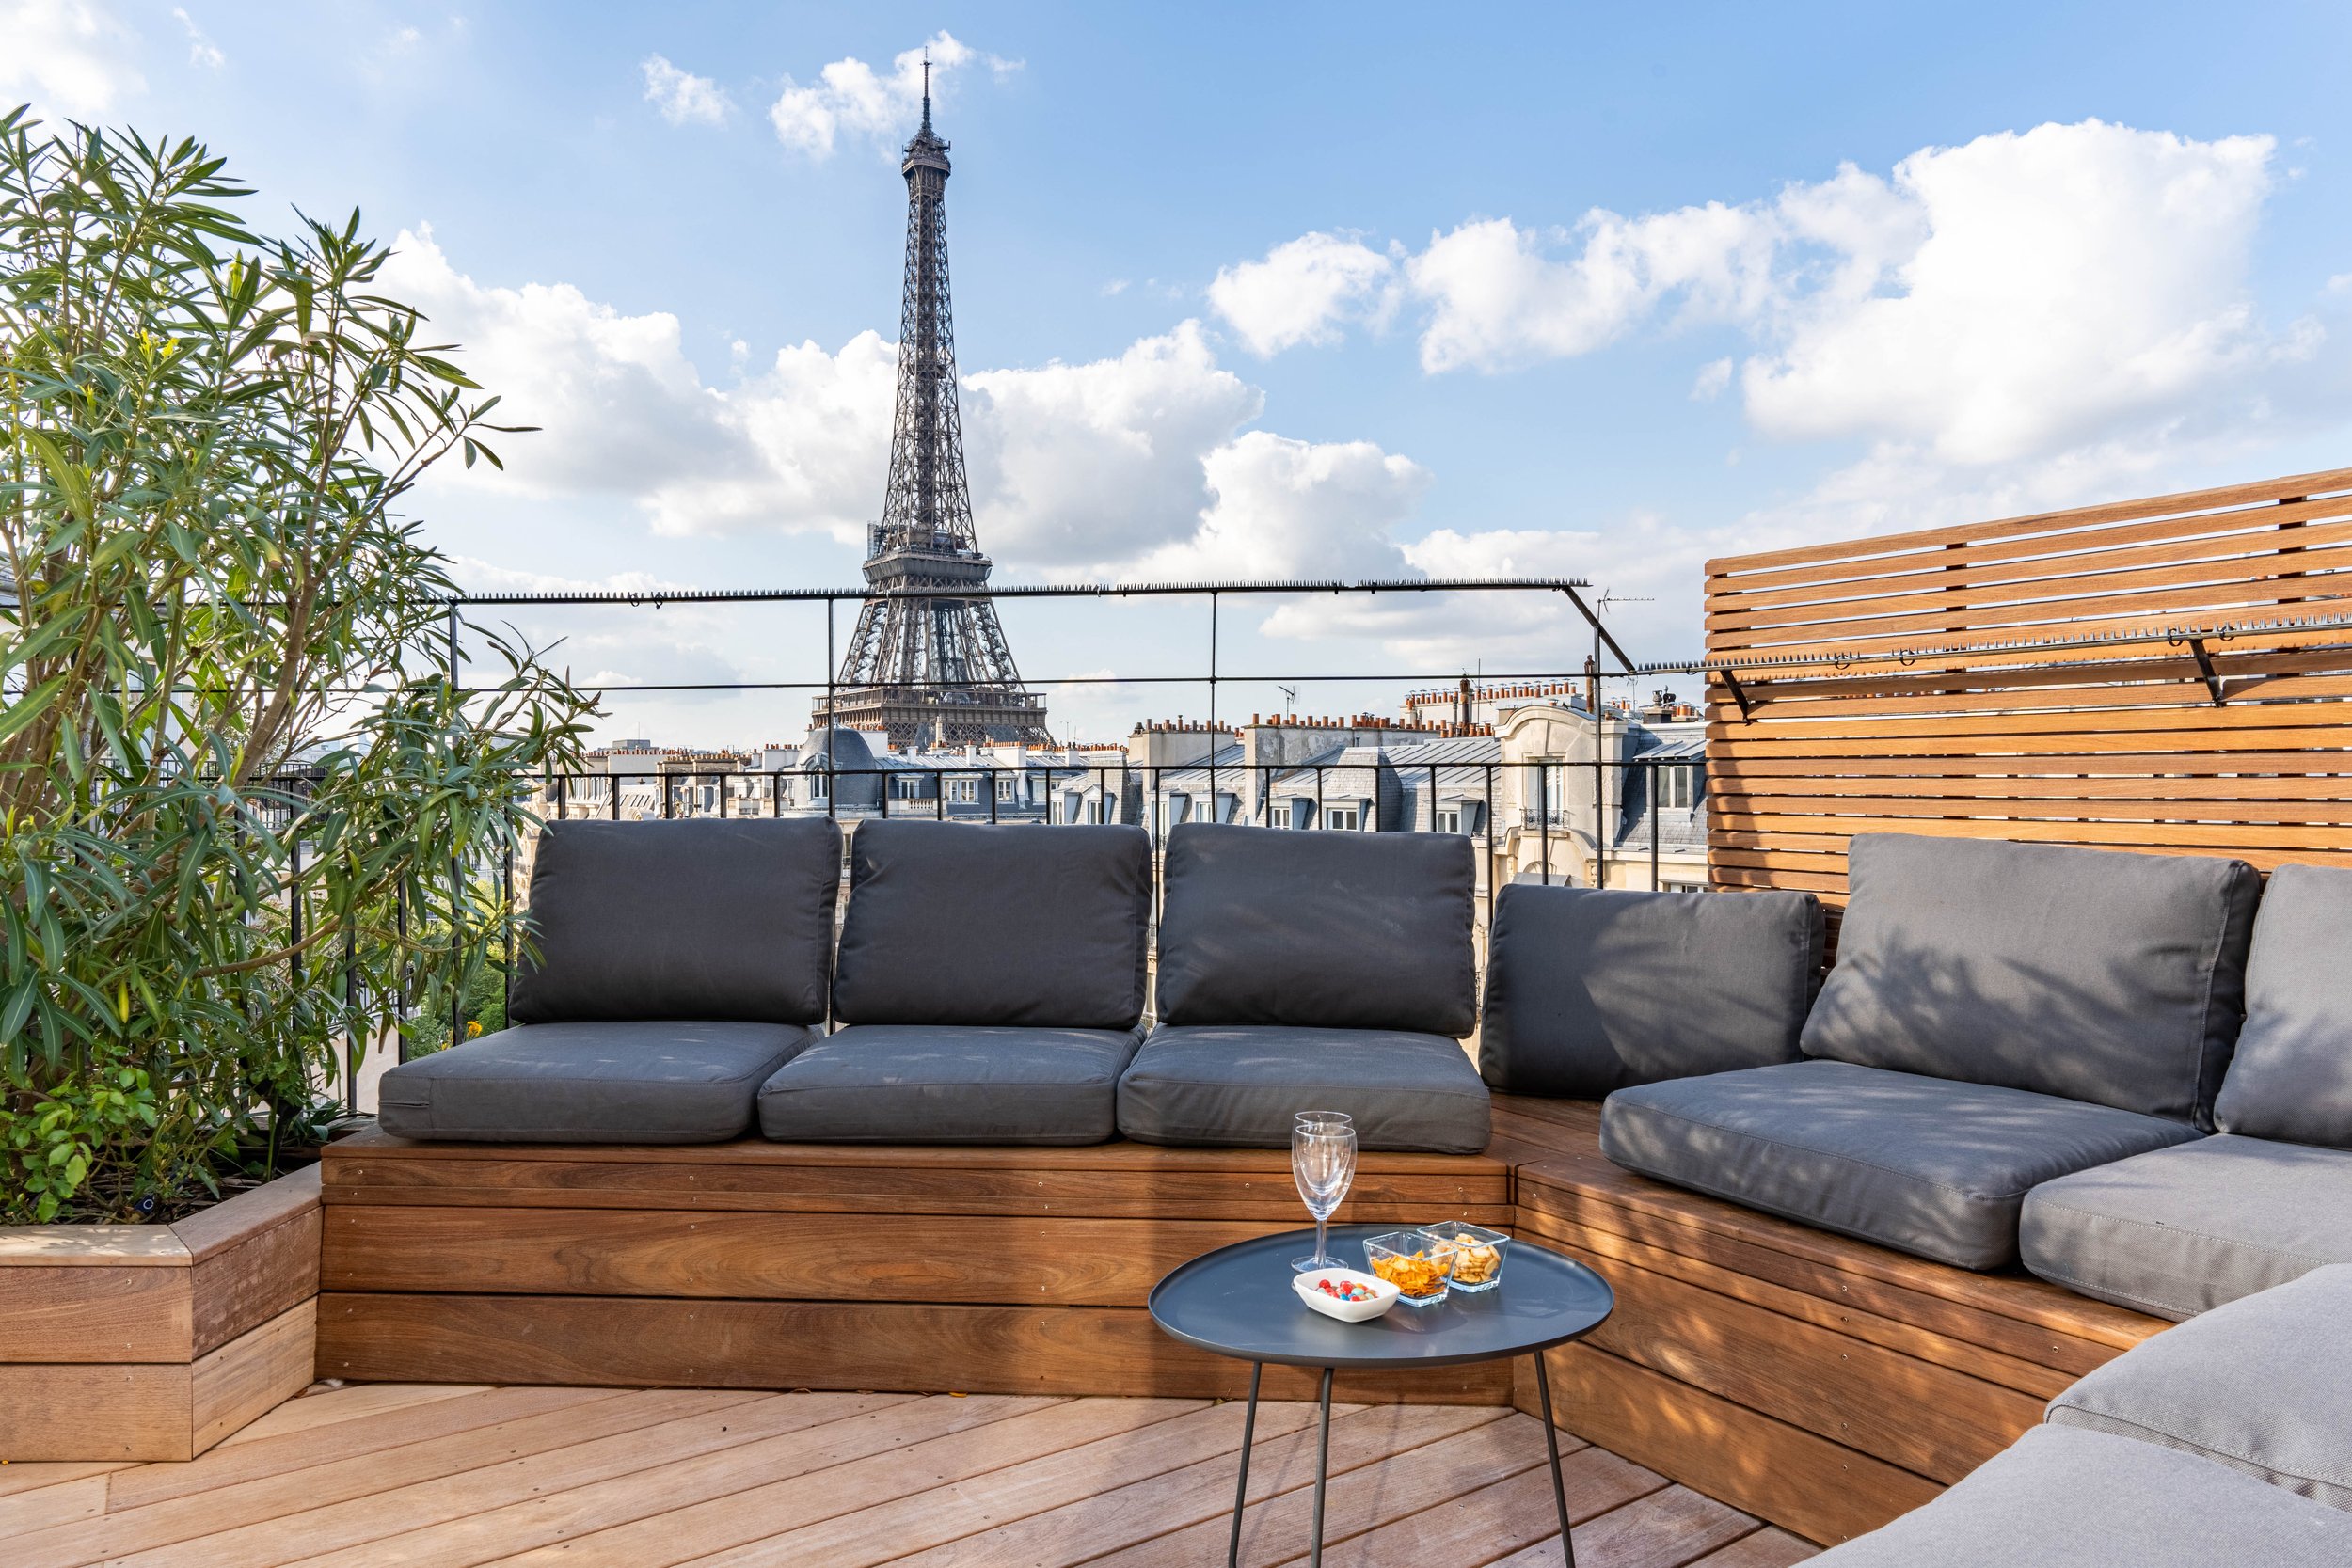 Luxury apartment overlooking the Eiffel Tower